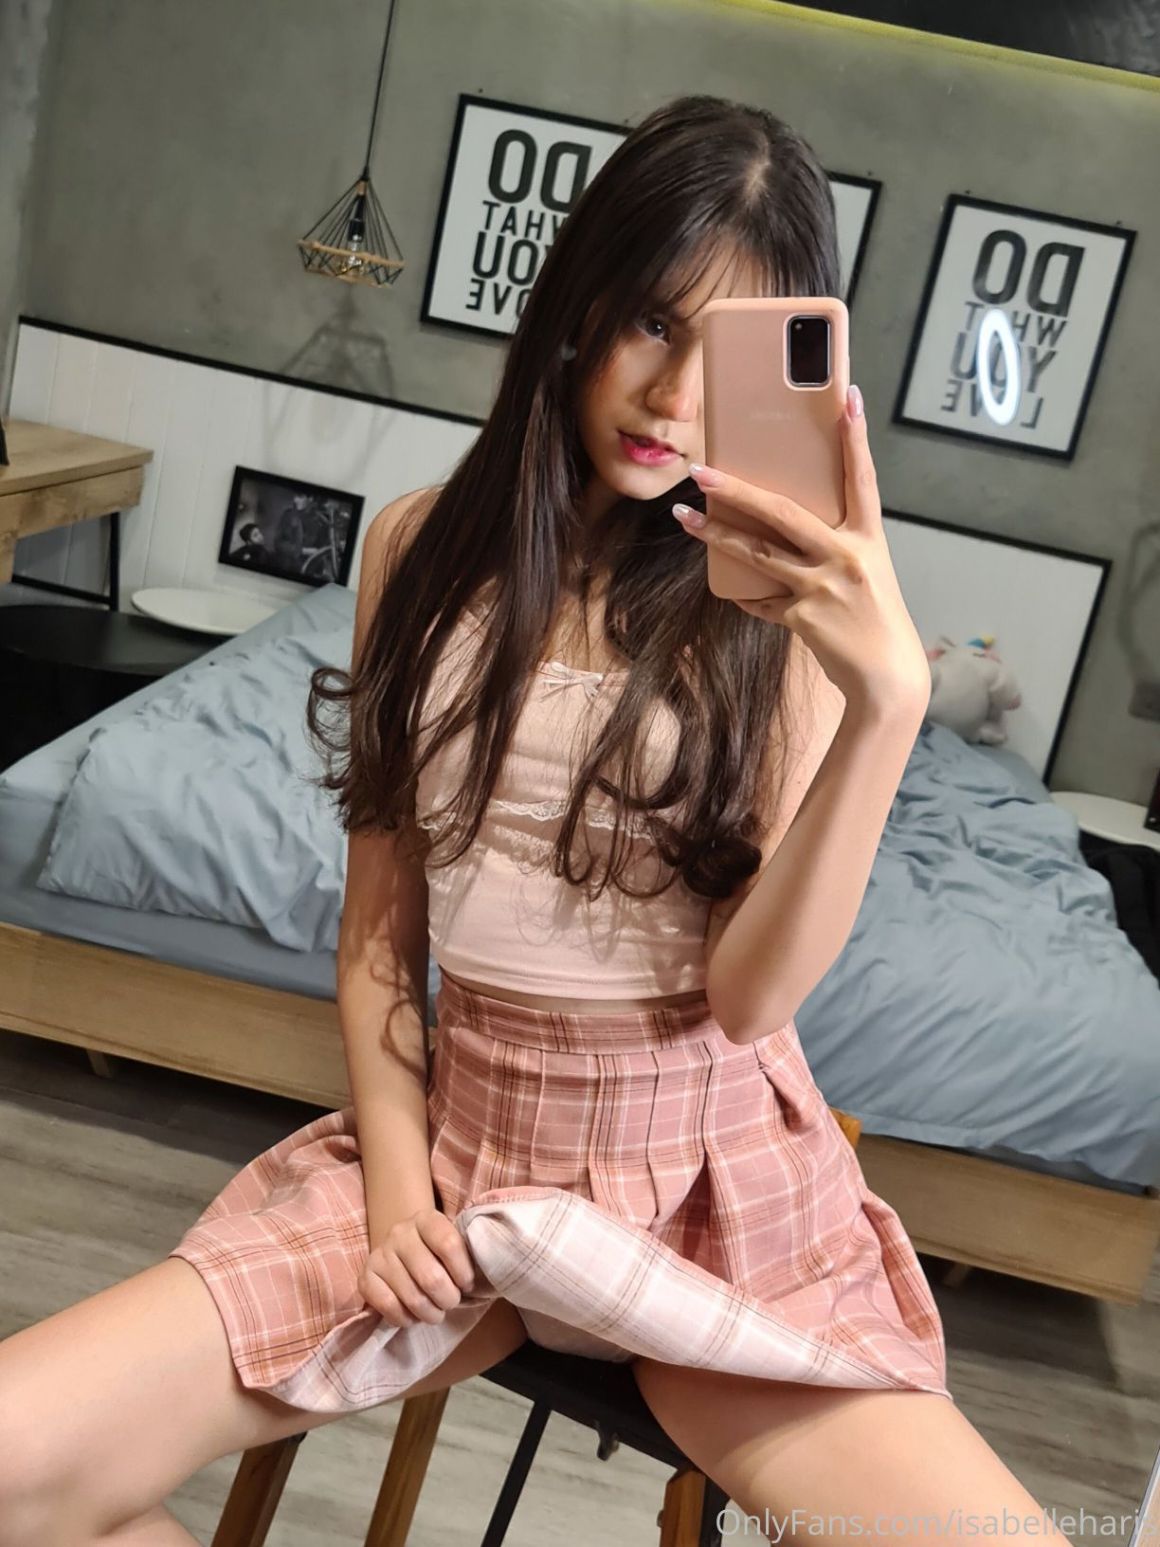 AsianOnlyfans 031 223 20211024